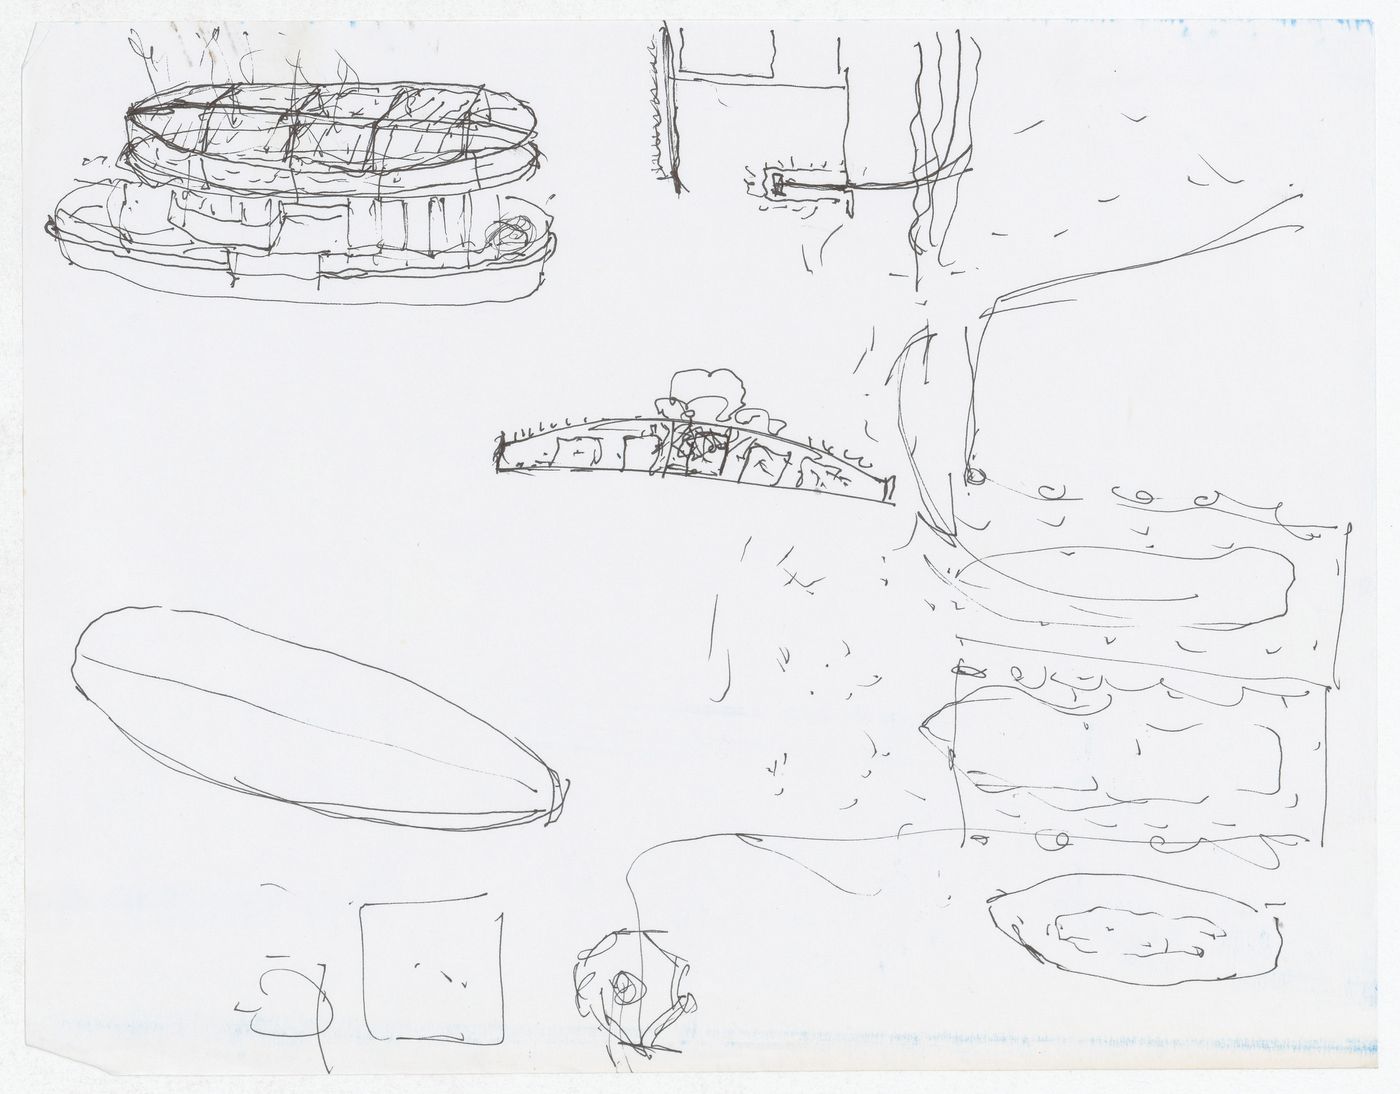 Sketch for the exhibition on James Wines at the Venice Biennale